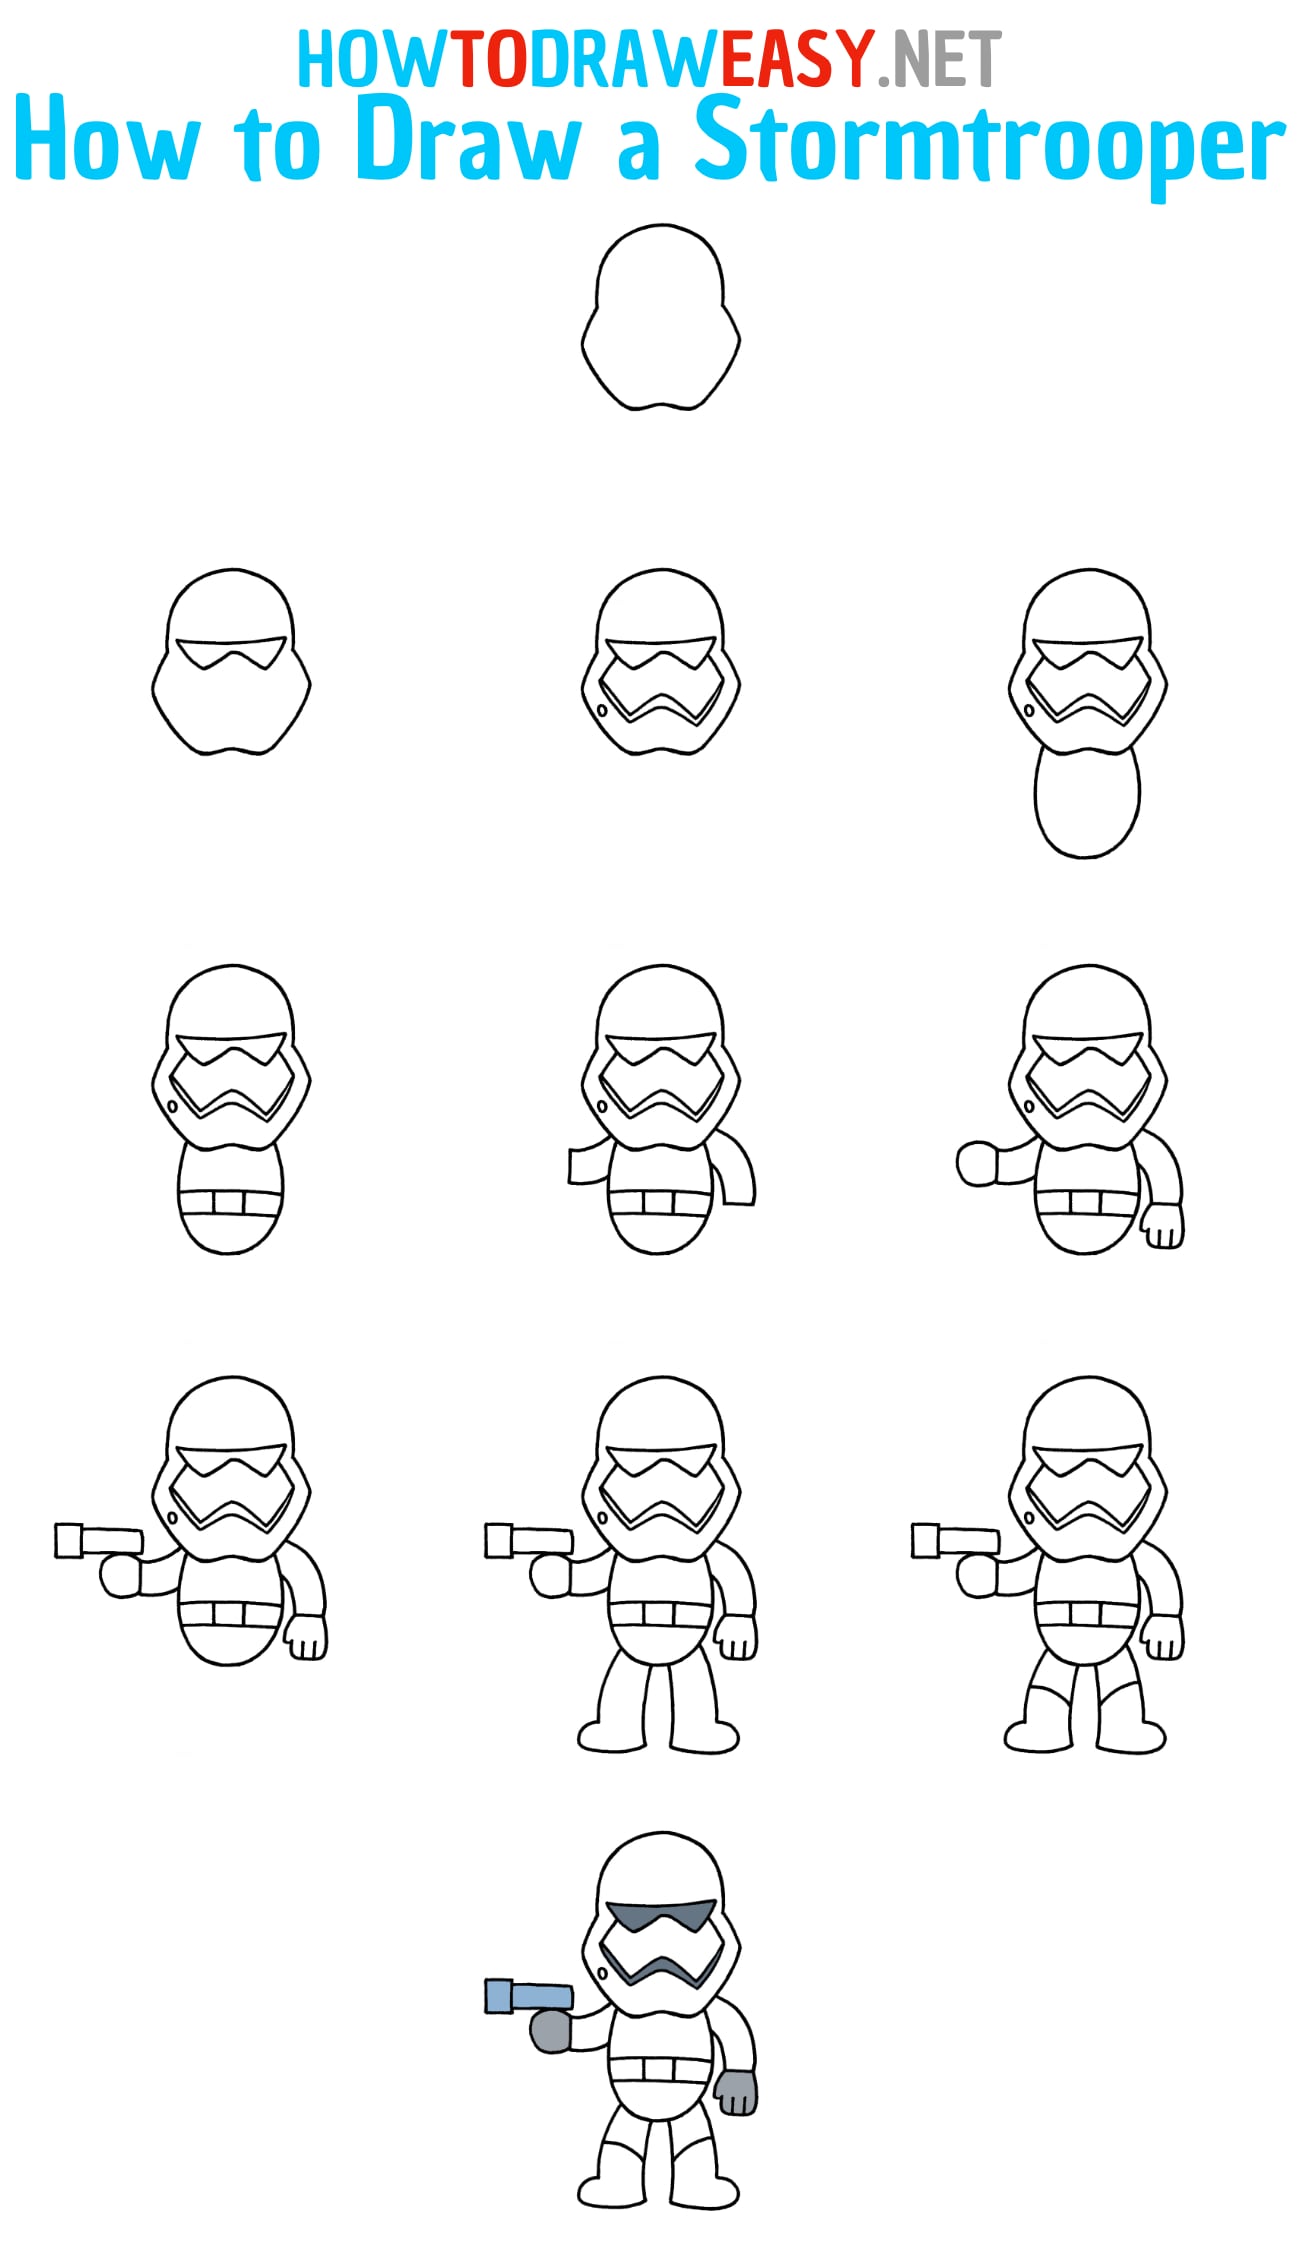 How to Draw a Stormtrooper Step by Step